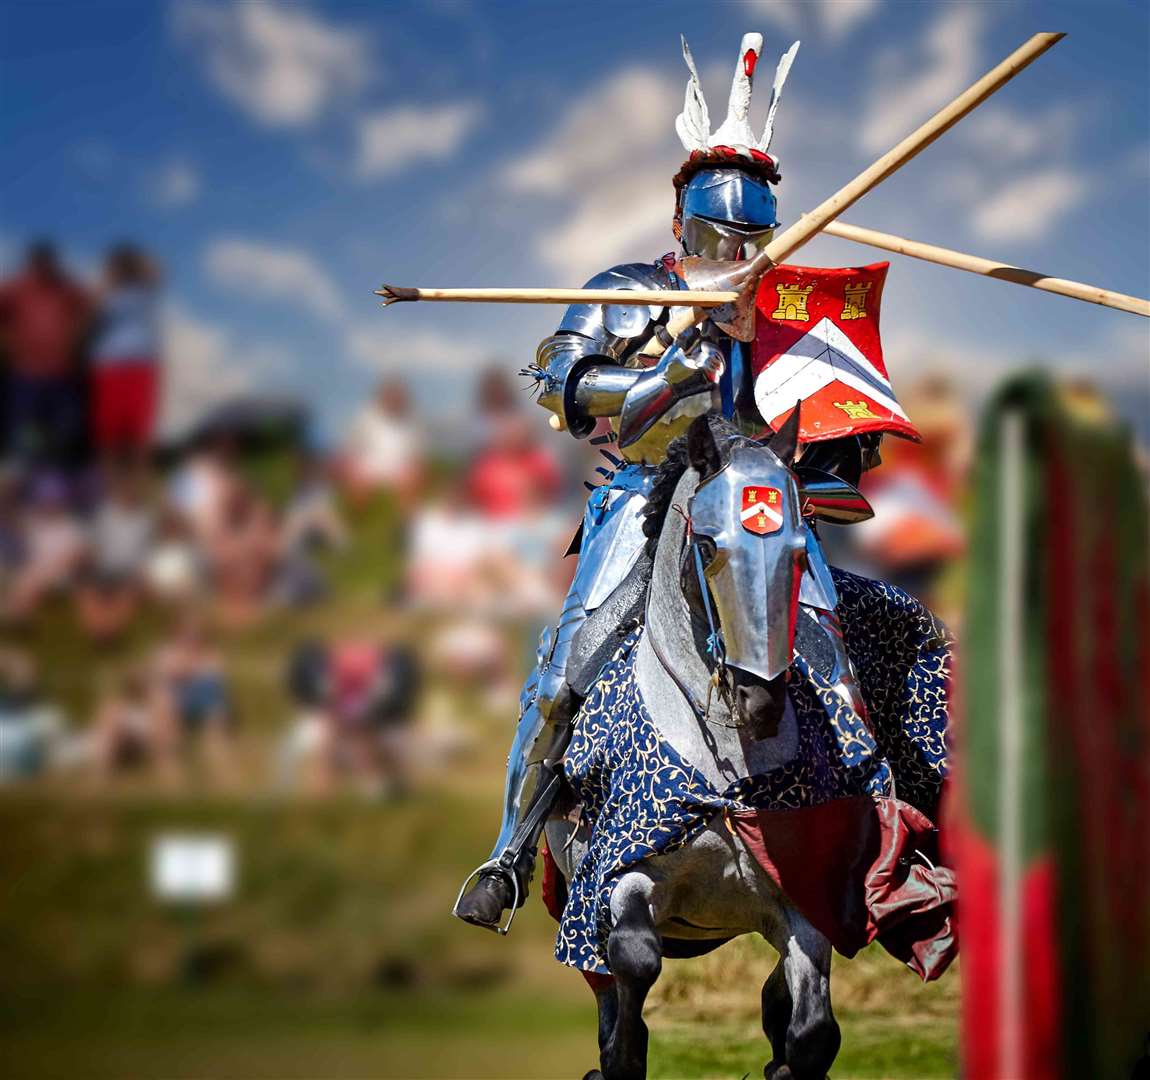 Lots of action at Dover Castle this weekend